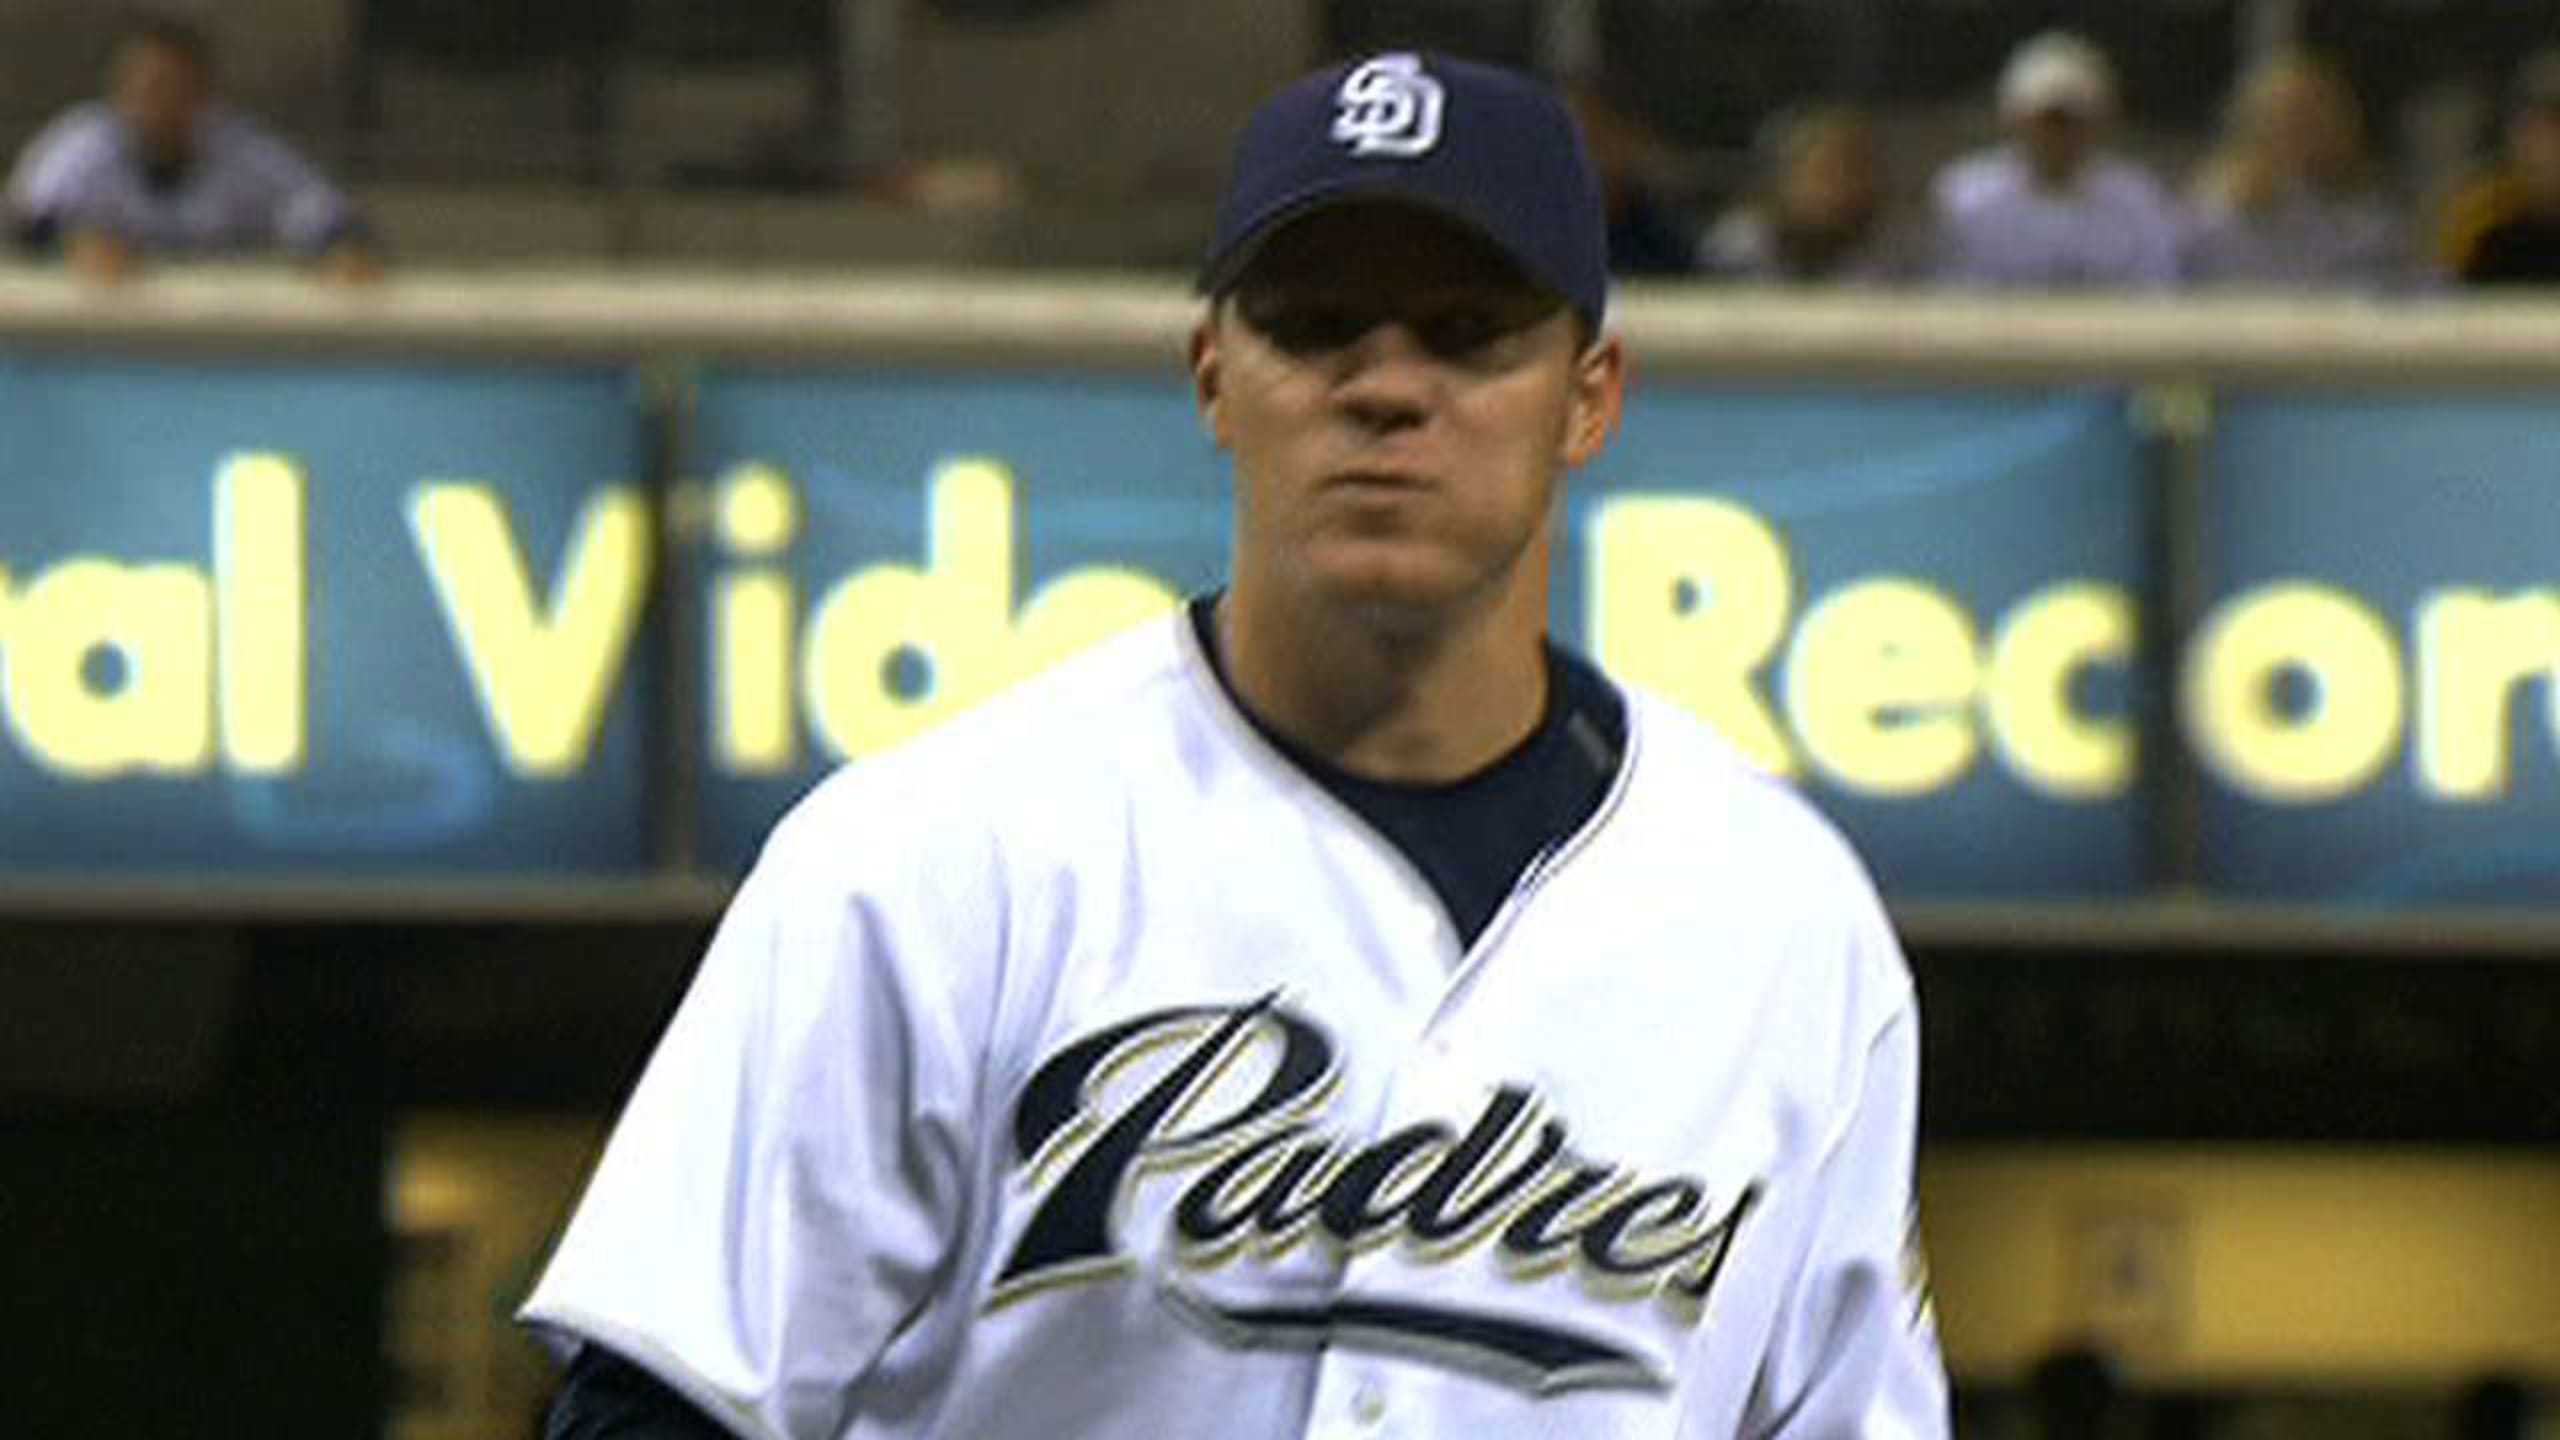 Former Cy Young Winner and Two-Time World Series Champ Jake Peavy